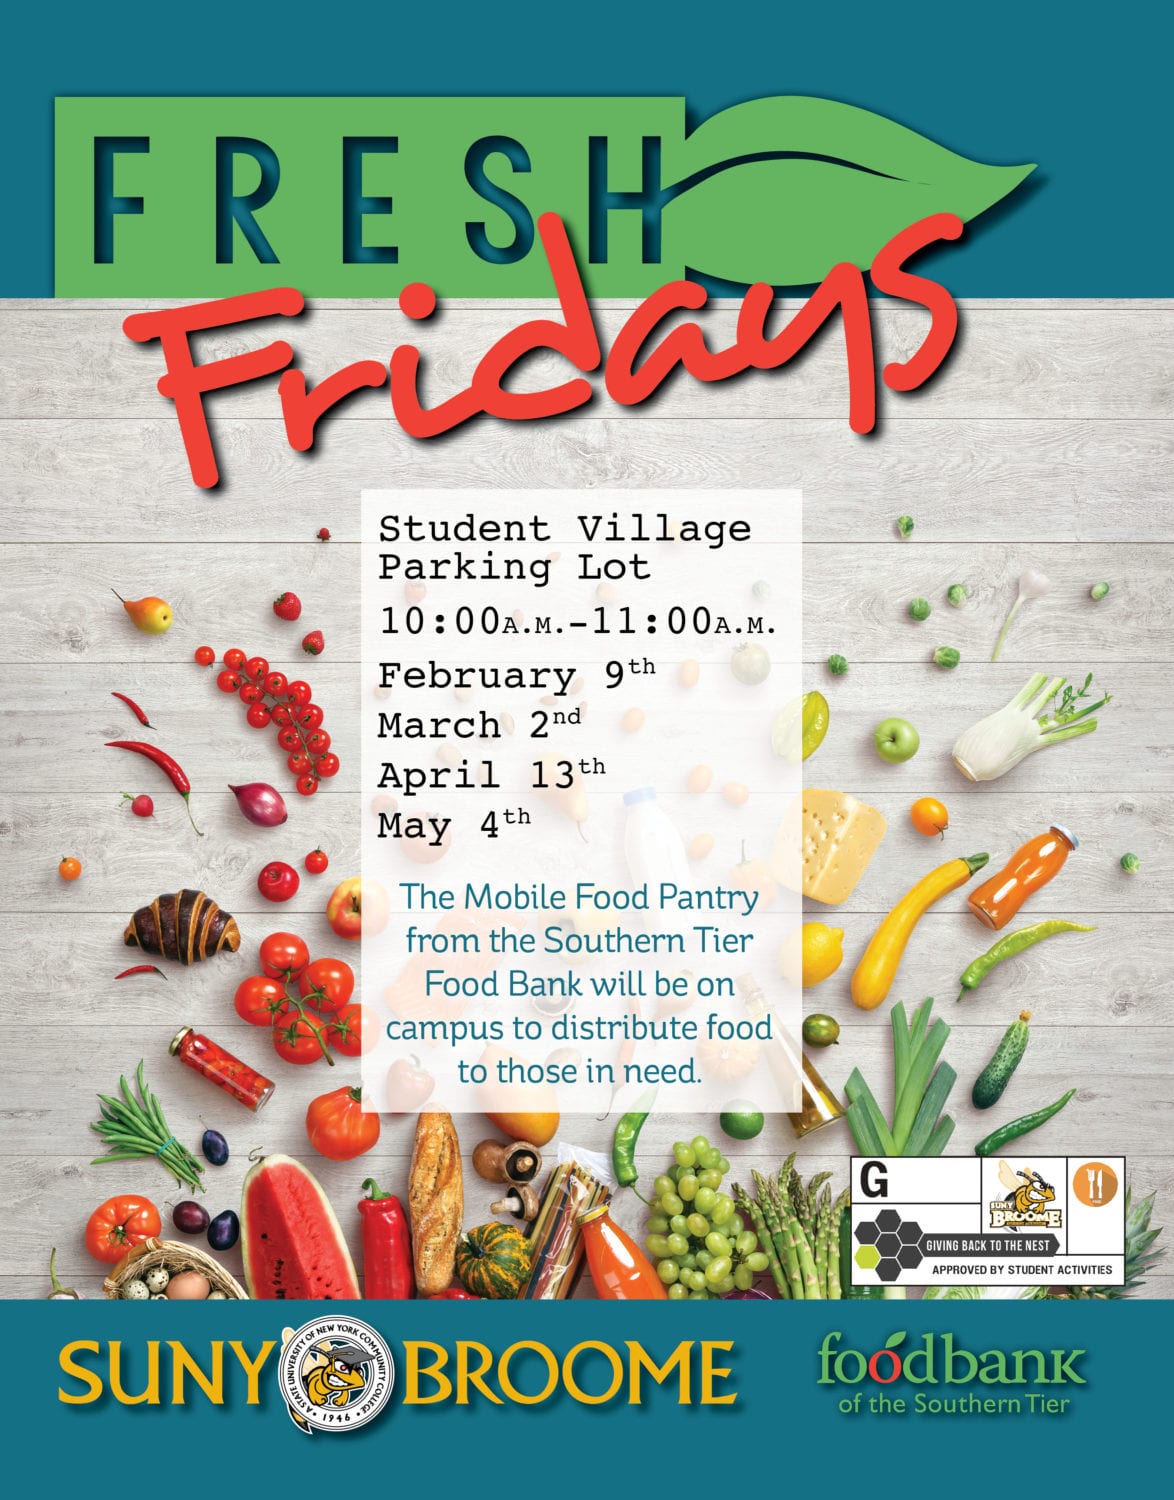 Need food? Fresh Fridays comes to campus March 2, April 13 and May 4